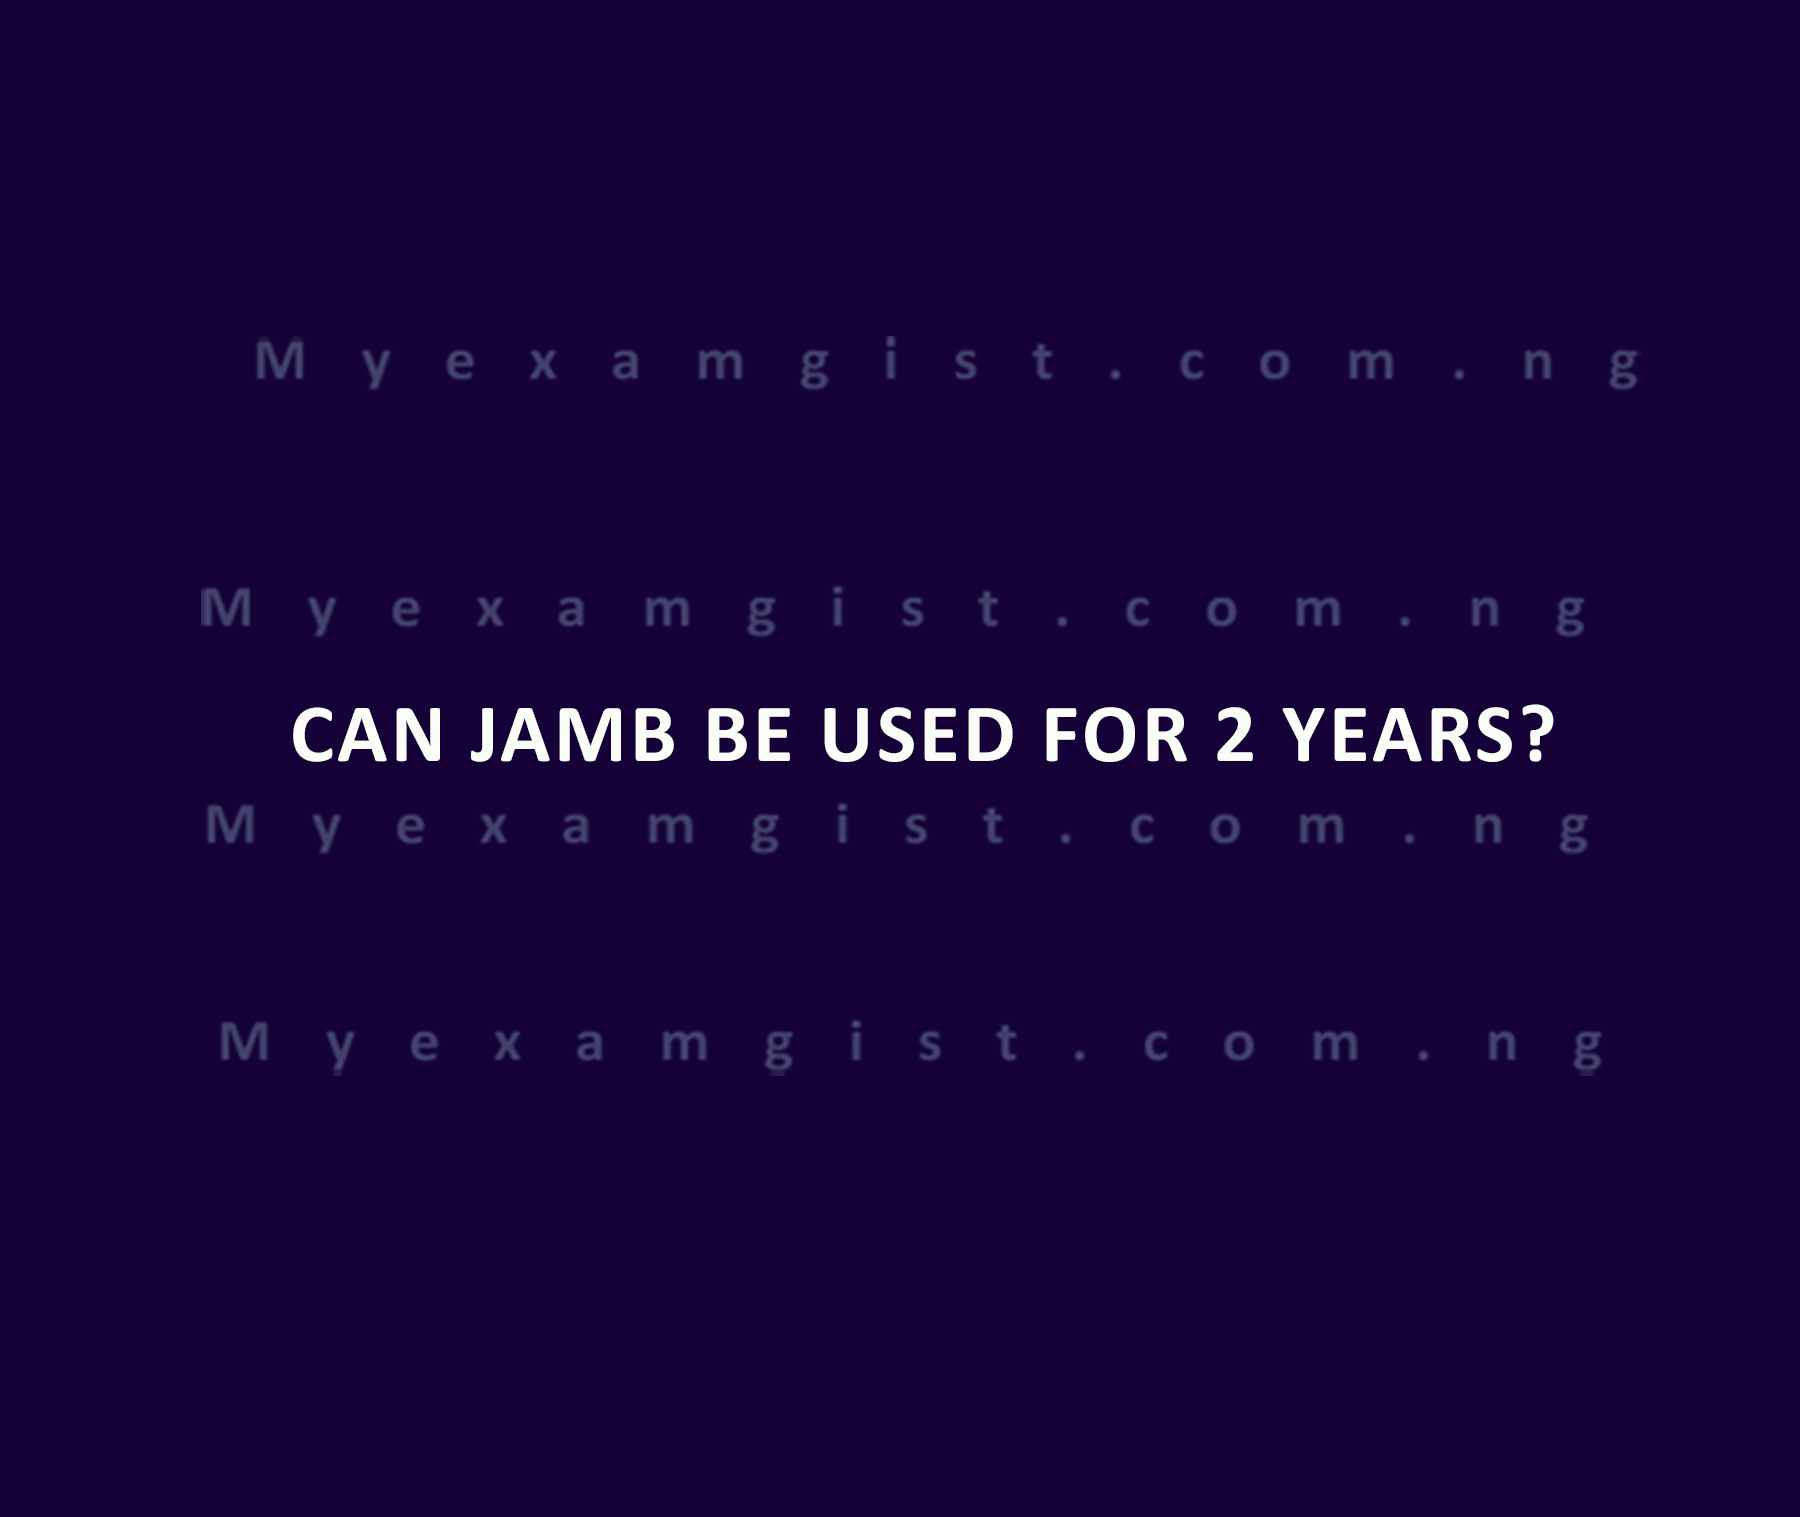 Can JAMB be used for 2 years?